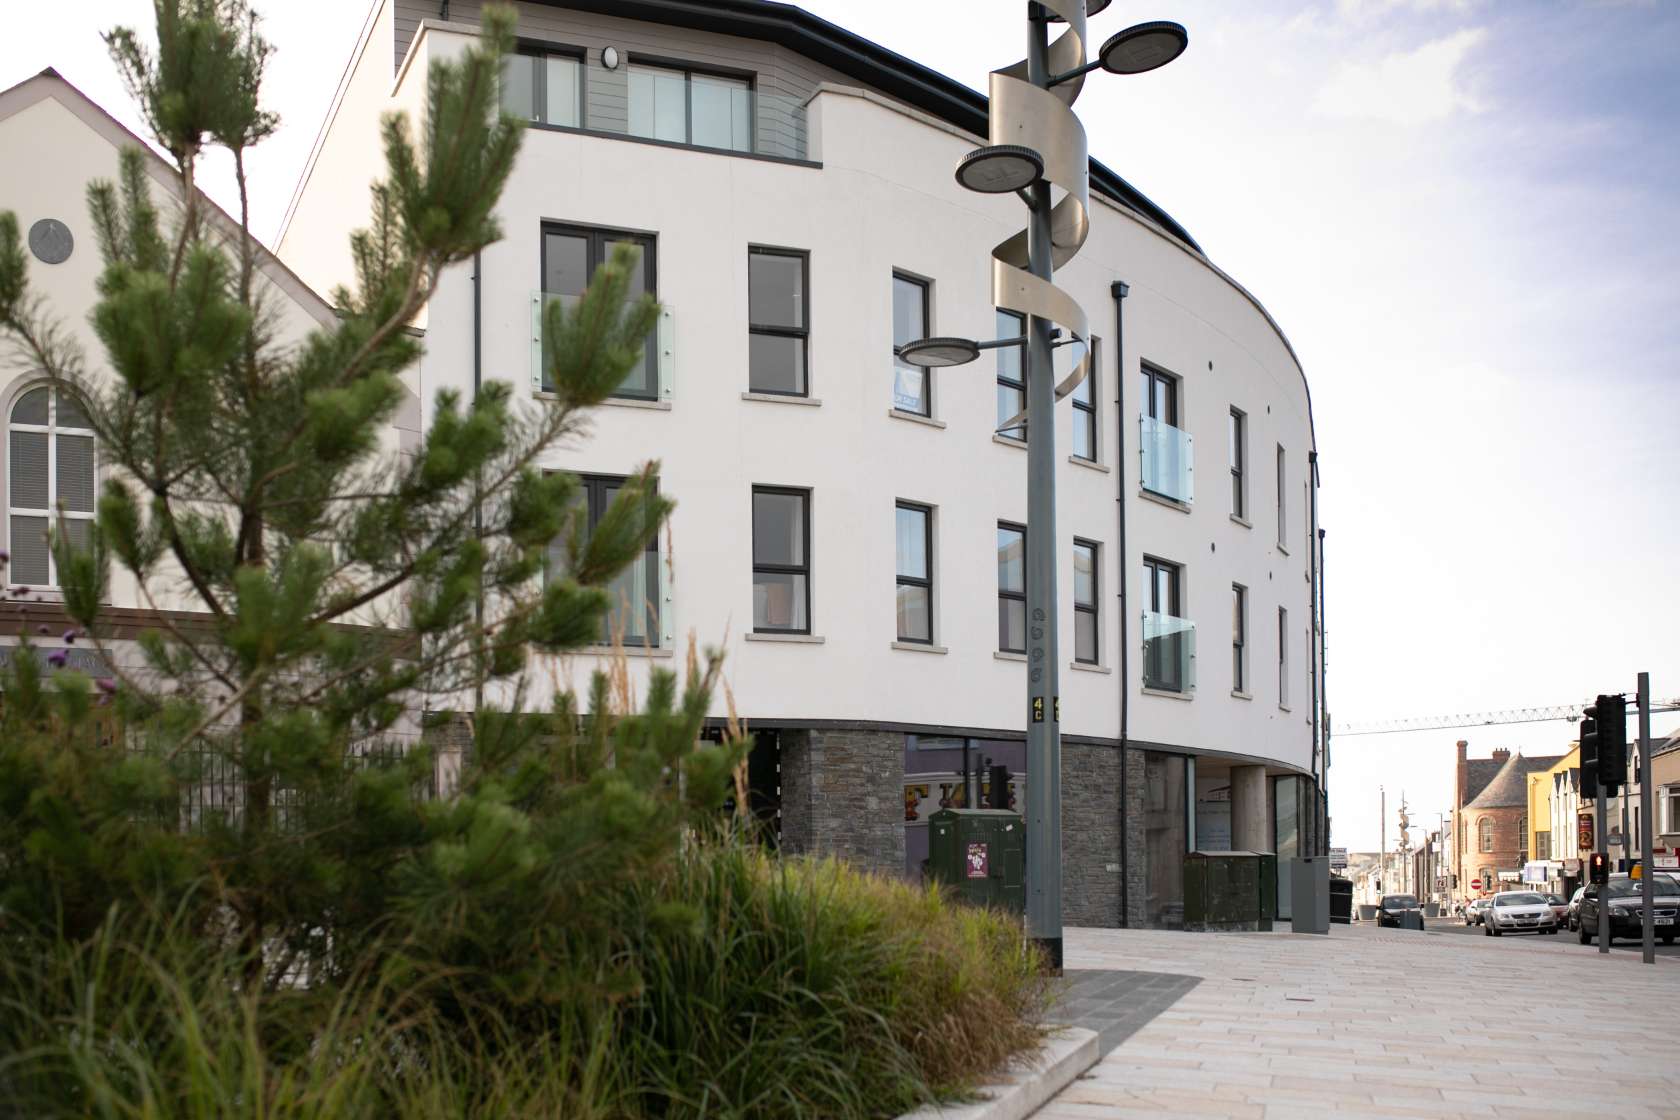 self-catering holiday accommodation portrush apartment image